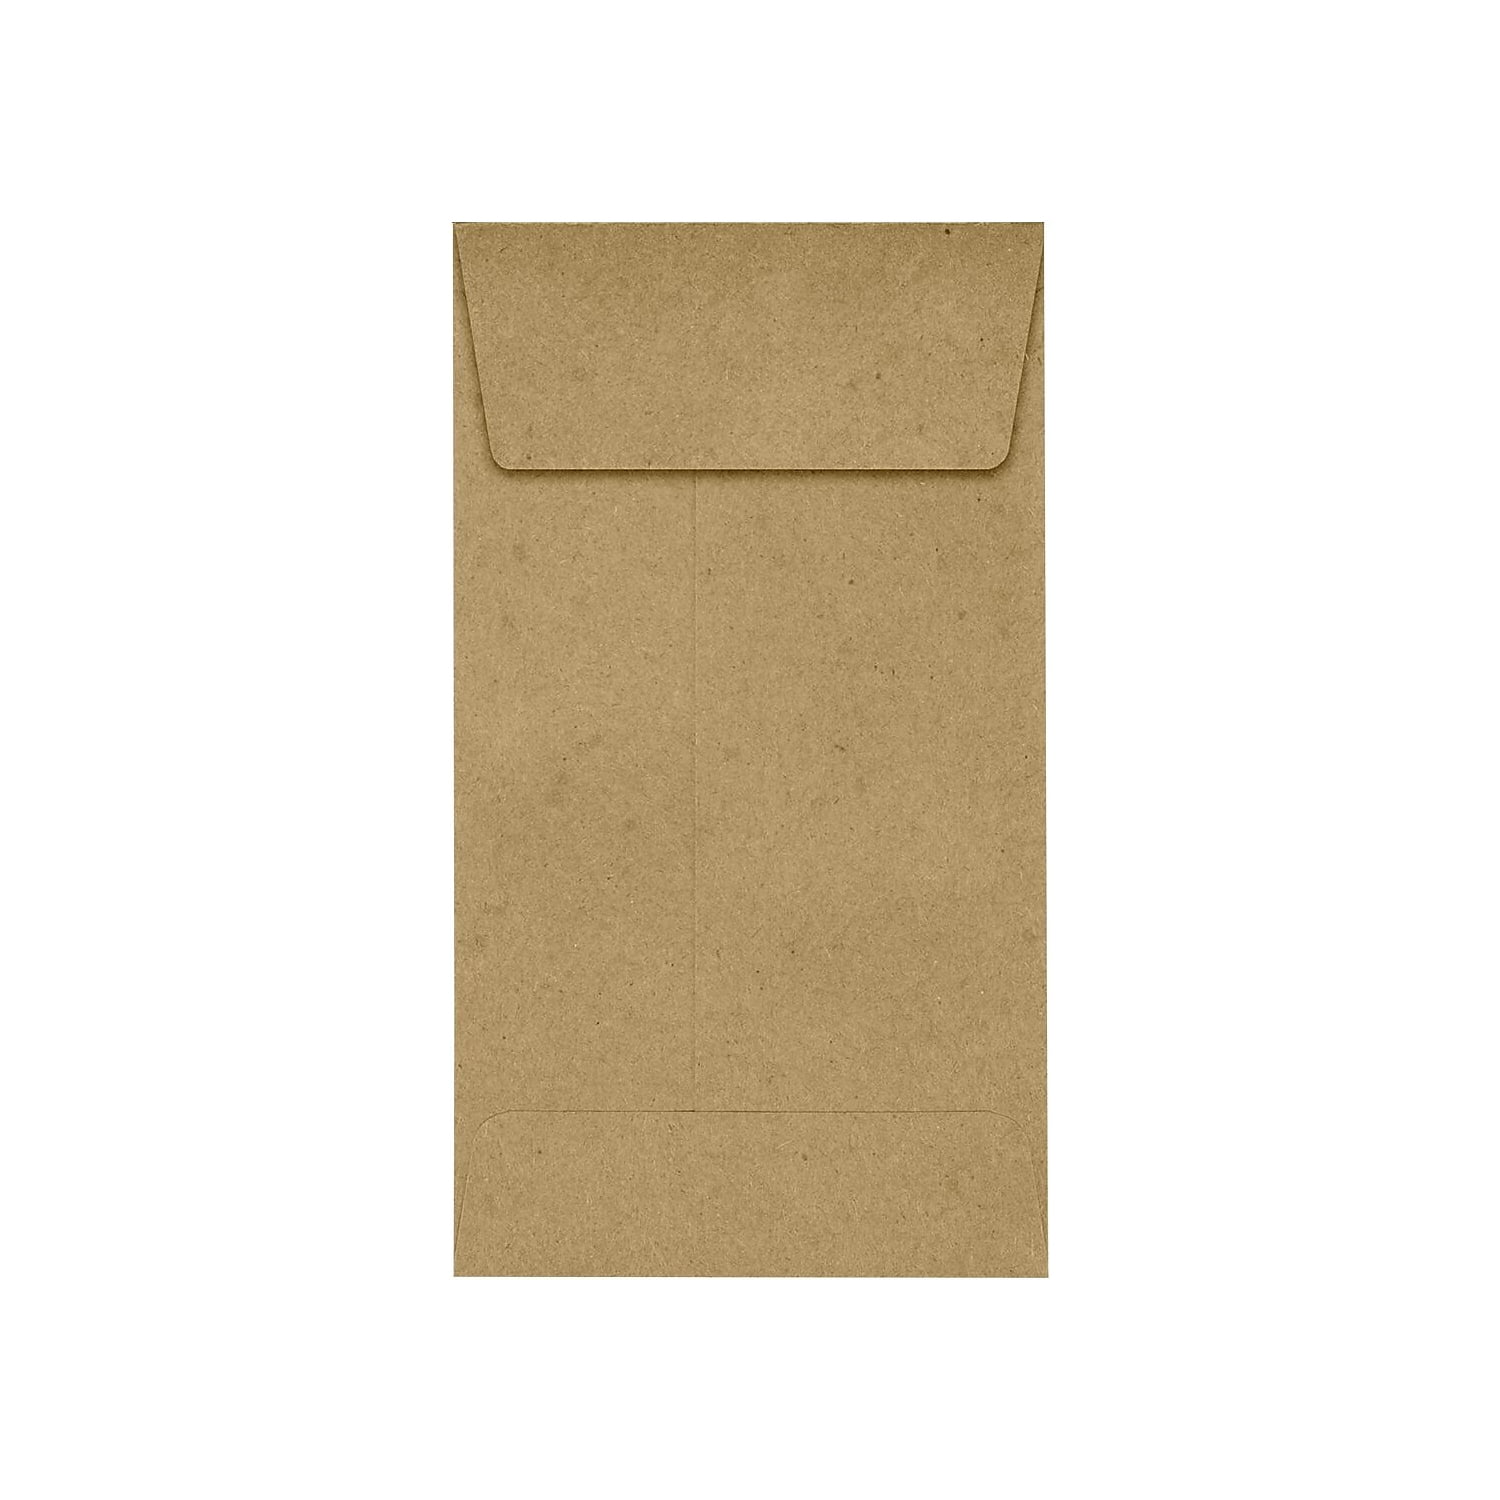 200 Pcs Kraft Small Seed Envelopes,2 1/4x3 1/2,Self-Adhesive Coin Envelopes for Garden,Office, Size: 2.25 x 3.5, Brown